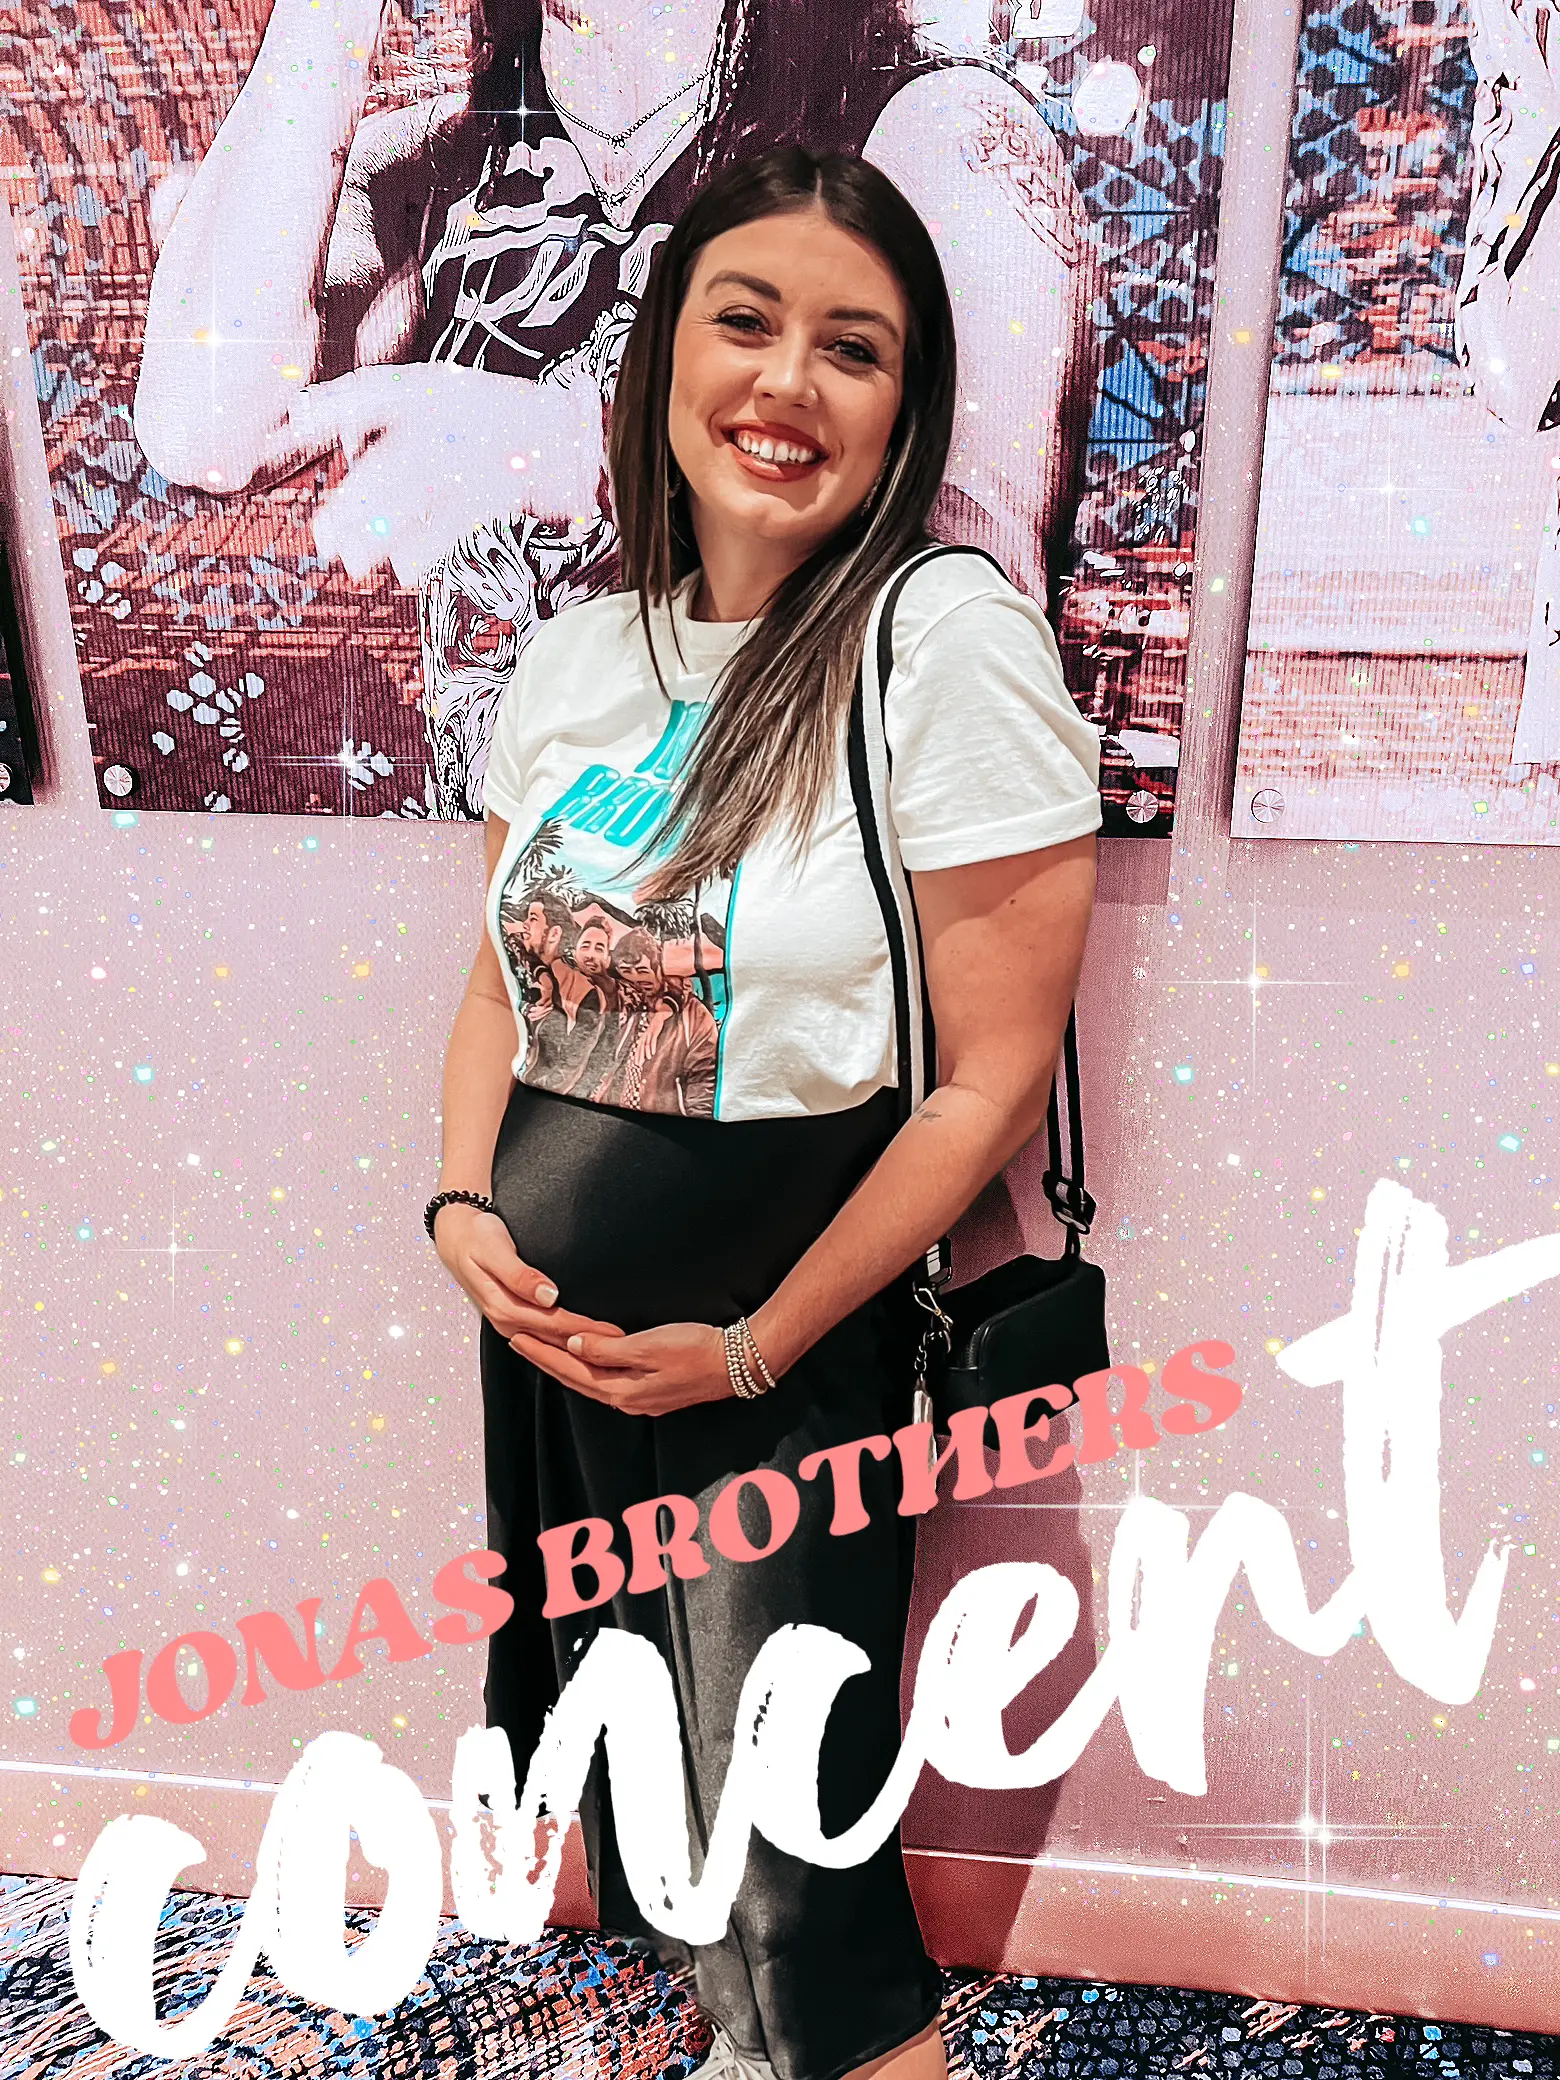 Jonas Brothers Concert Outfit Inspo Gallery posted by Tay Lemon8